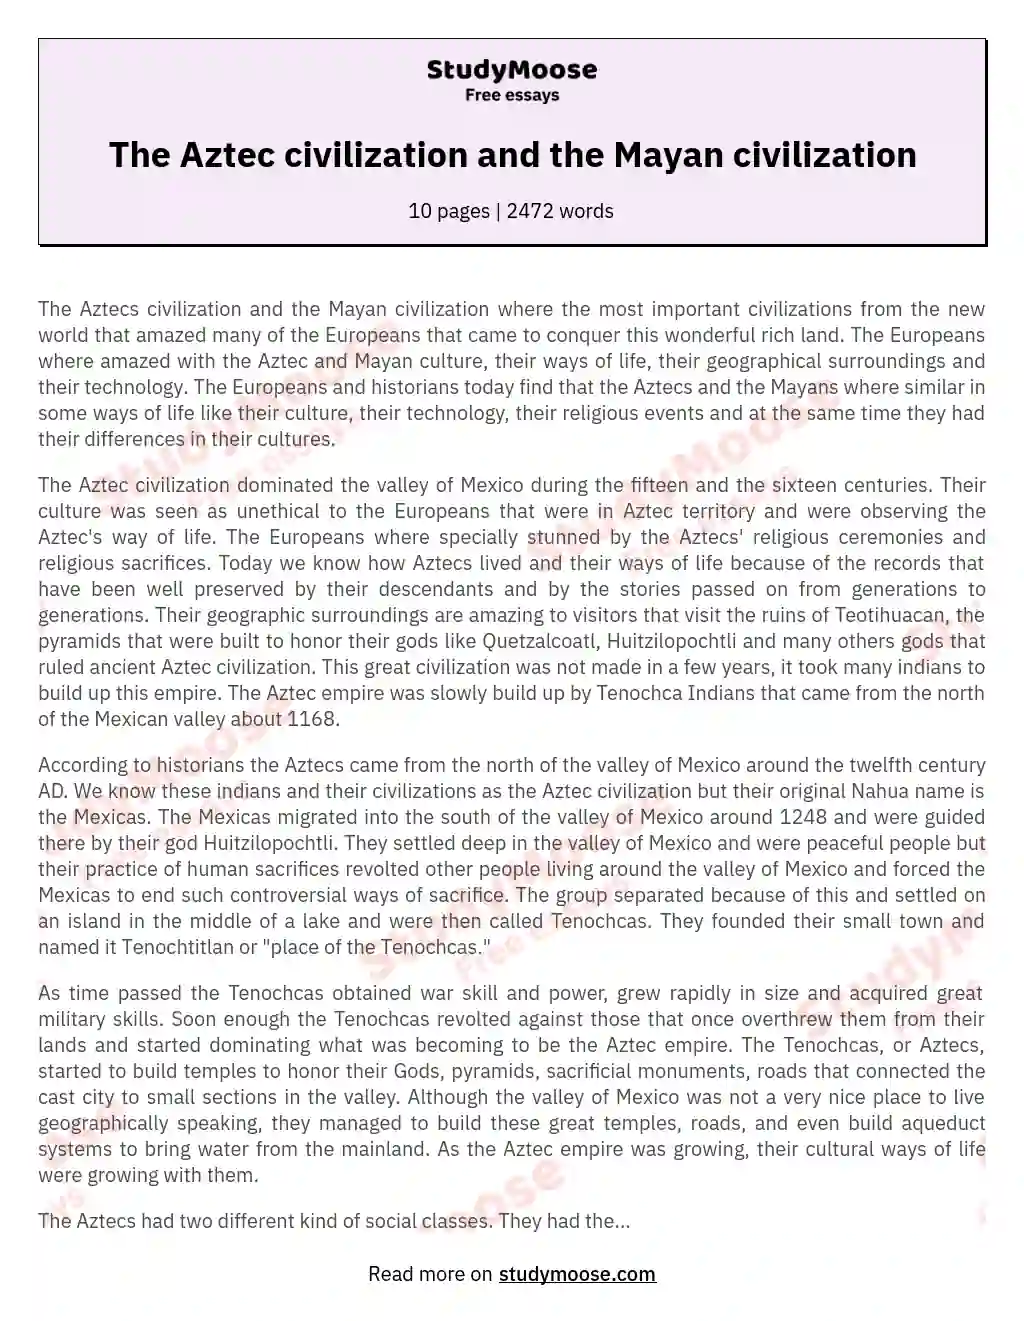 The Aztec Civilization: Culture, Technology, and Society essay